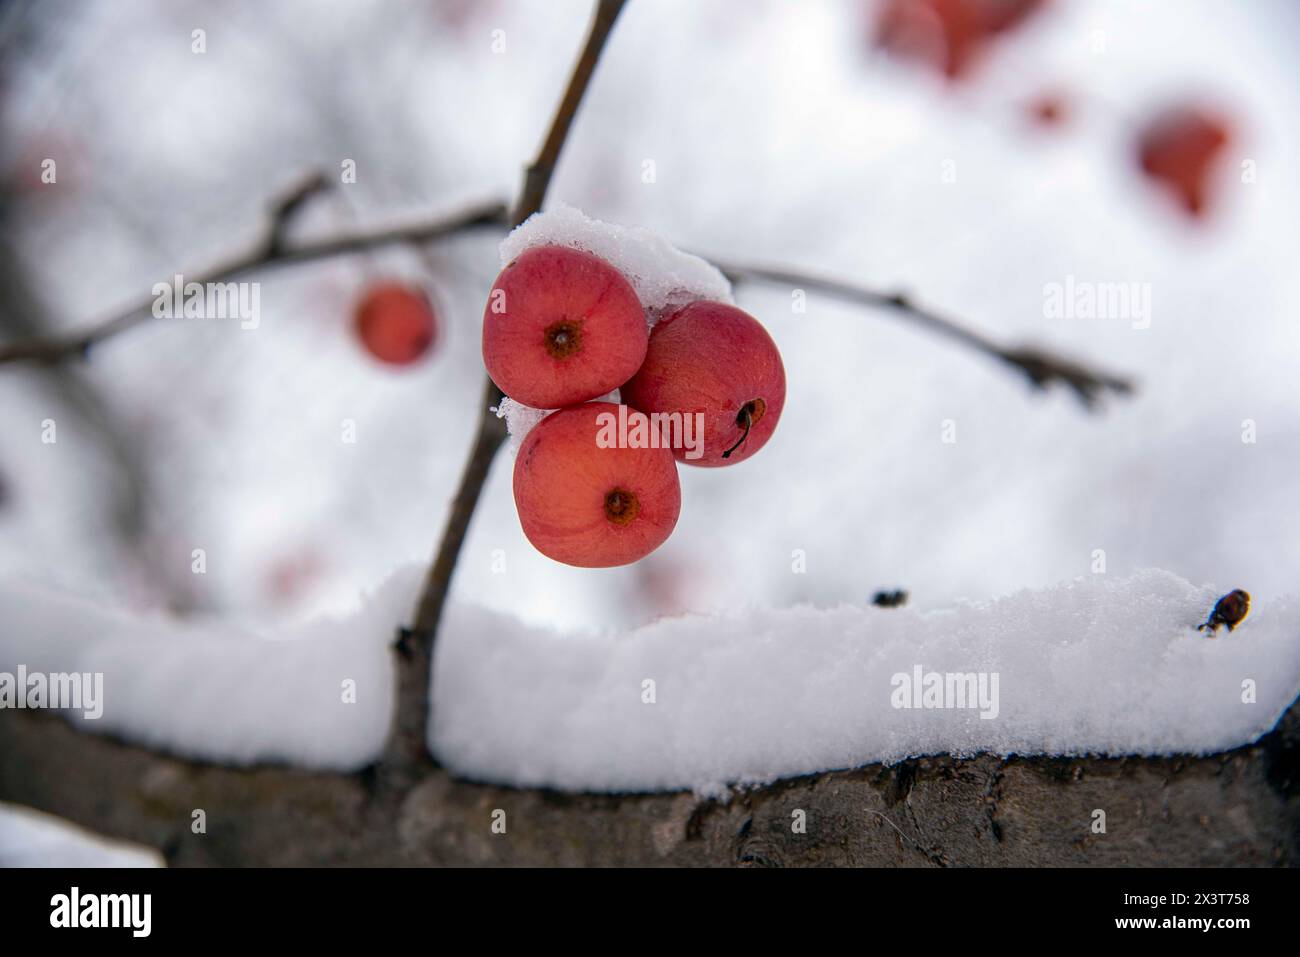 Three crabapples hanging off a crabapple tree branch in the winter time. Captured in Minnesota after a fresh snowfall. Stock Photo